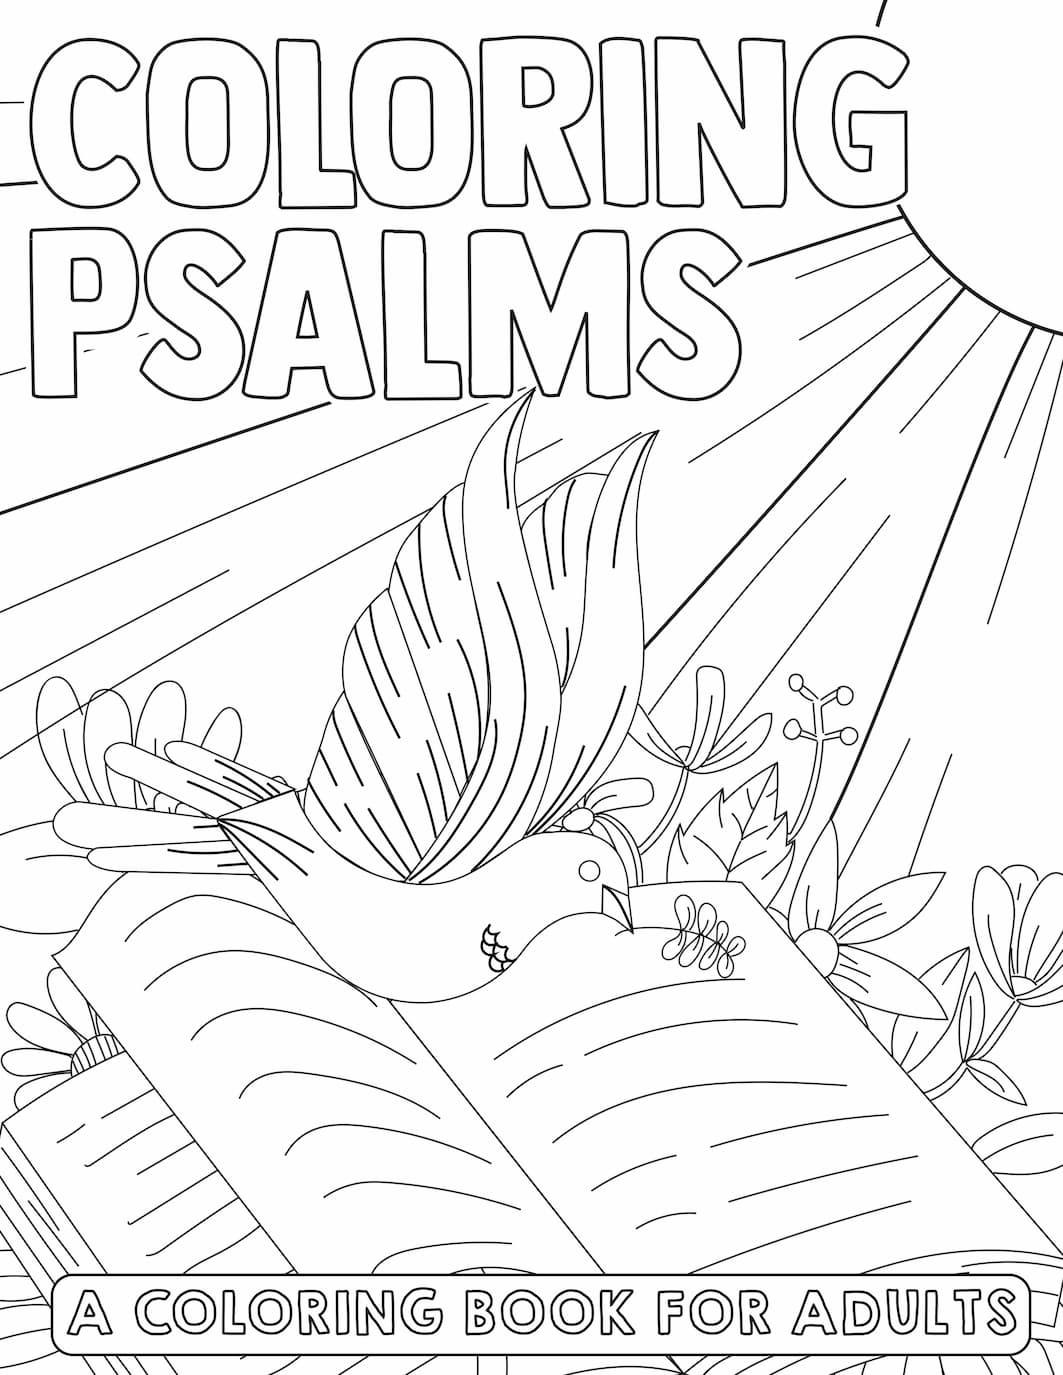 Book of psalms page bible coloring book download only